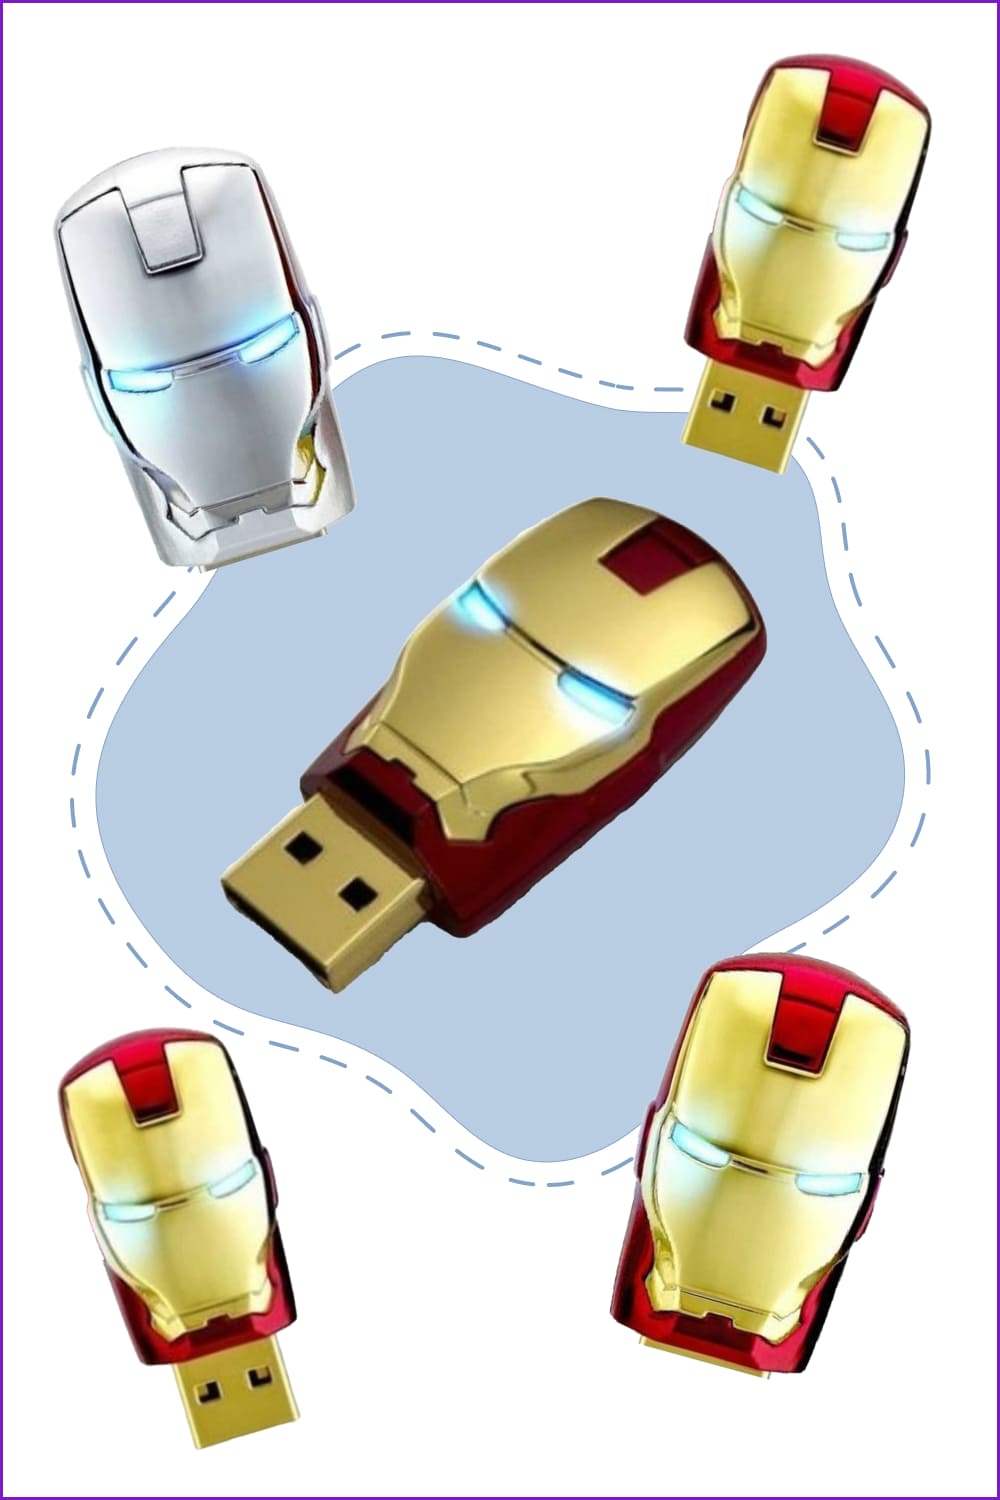 Flash Drive in form of head of Iron Man.